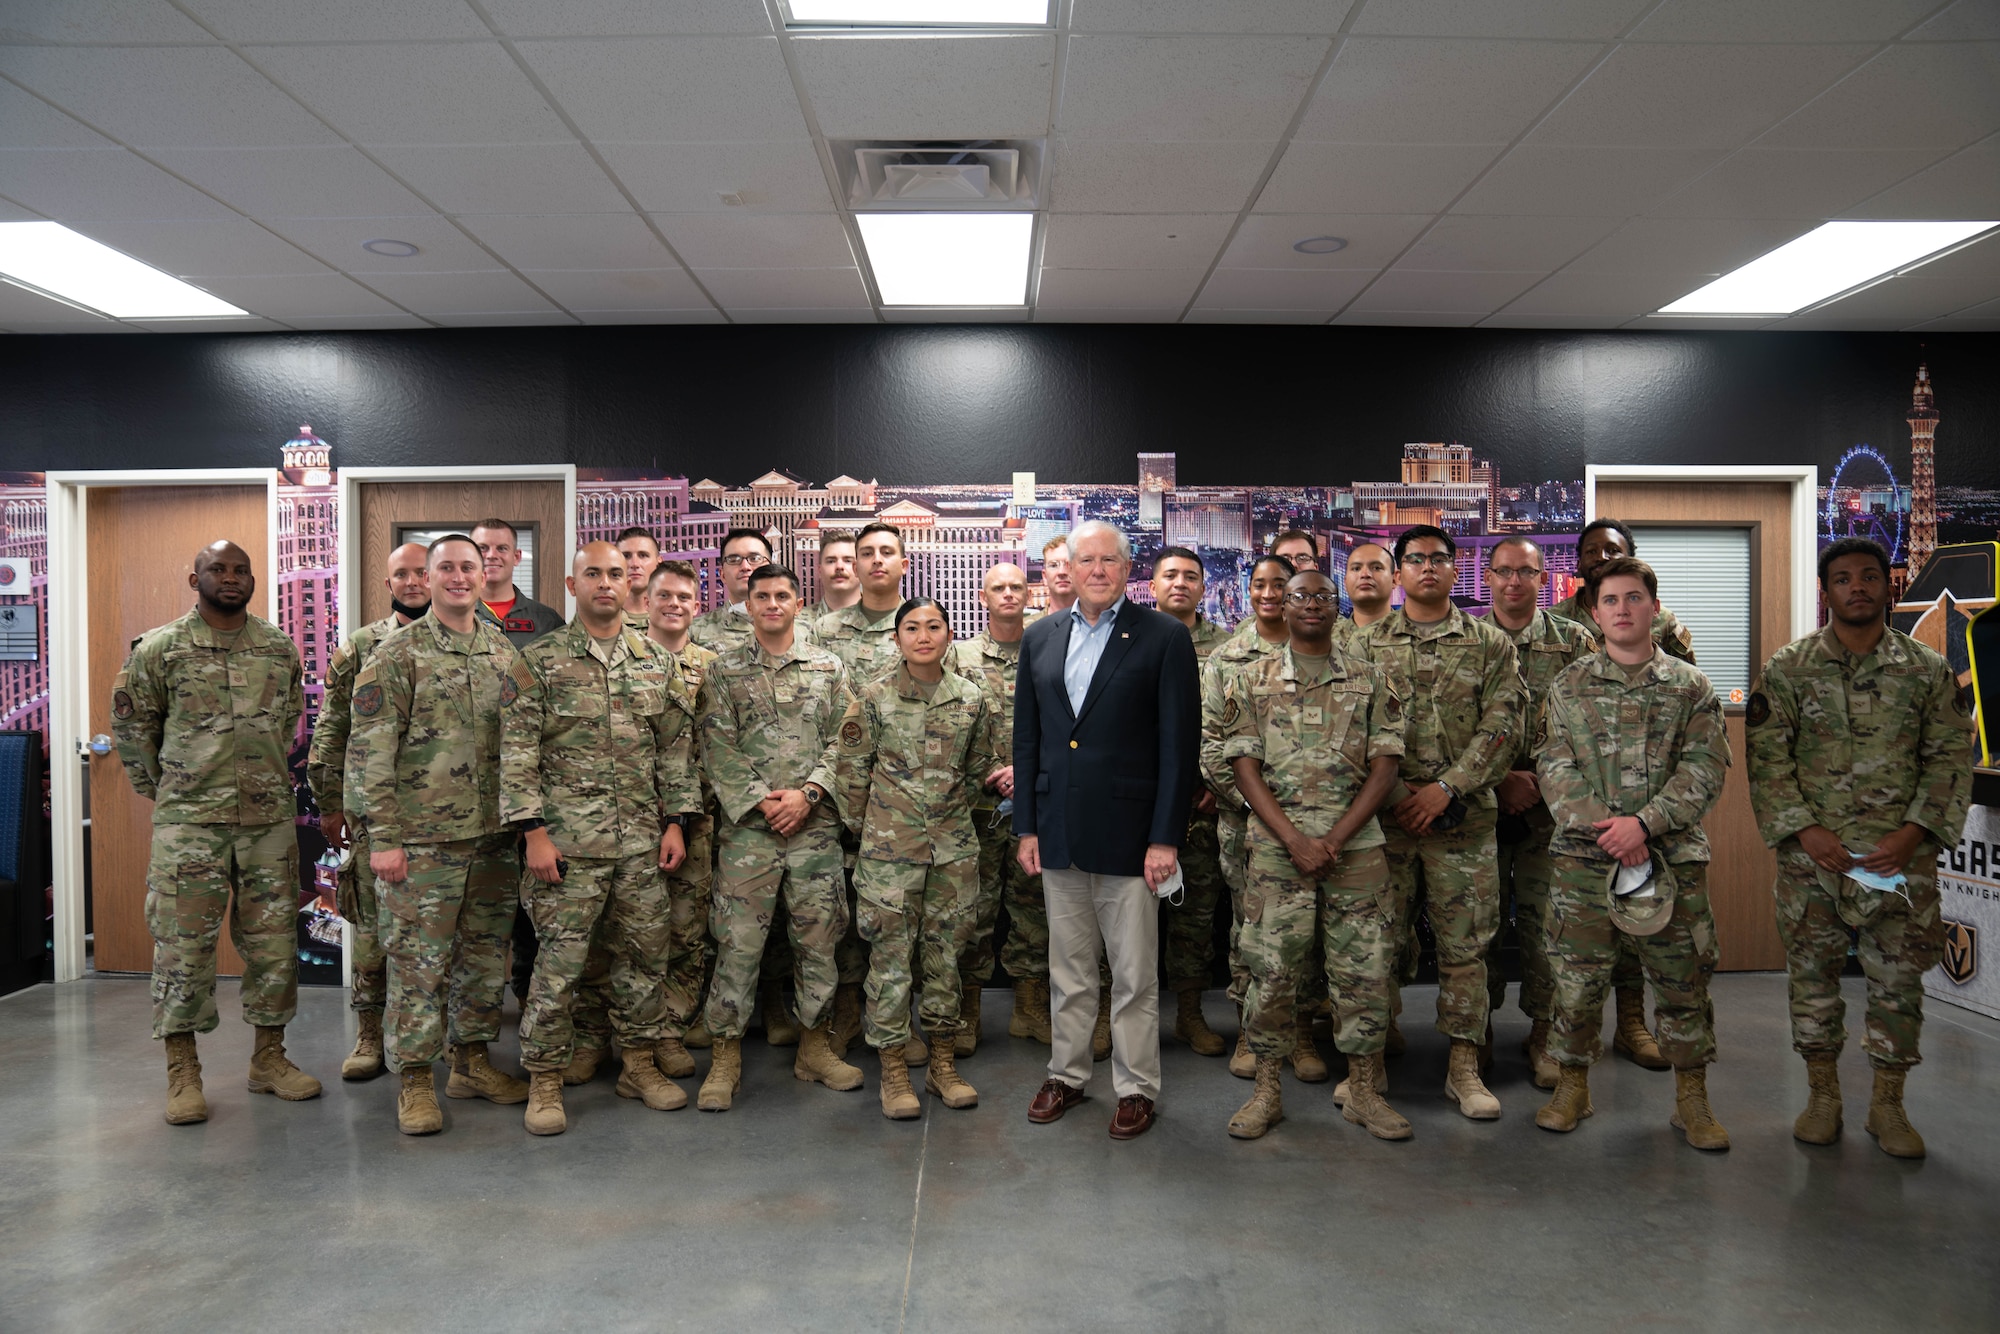 Secretary of the Air Force Frank Kendall poses with Airmen assigned to the 432nd Wing/432nd Expeditionary Wing at Creech Air Force Base, Nevada, July 29, 2022. Kendall participated in a roundtable discussion to listen and respond to their questions and concerns. (U.S. Air Force photo by Airman 1st Class Ariel O'Shea)